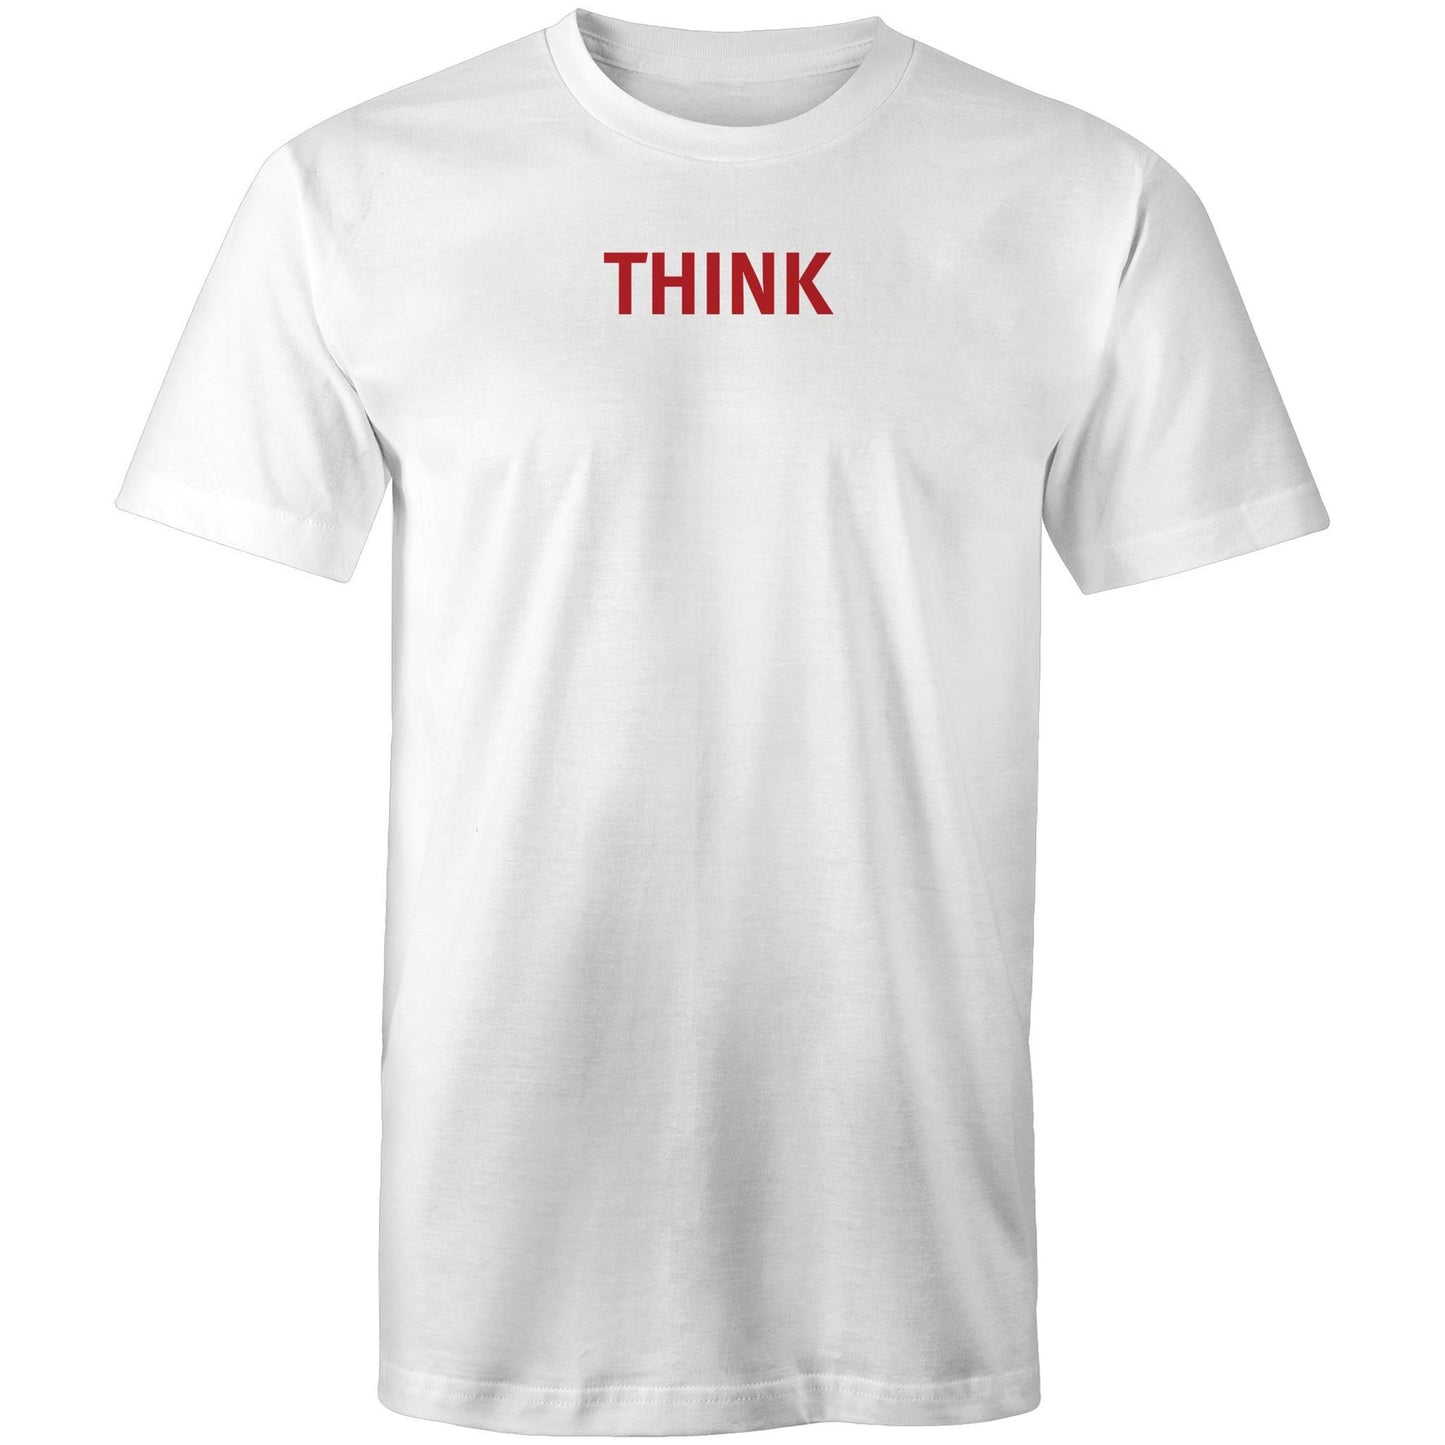 THINK Word T Shirts for Men (Unisex)